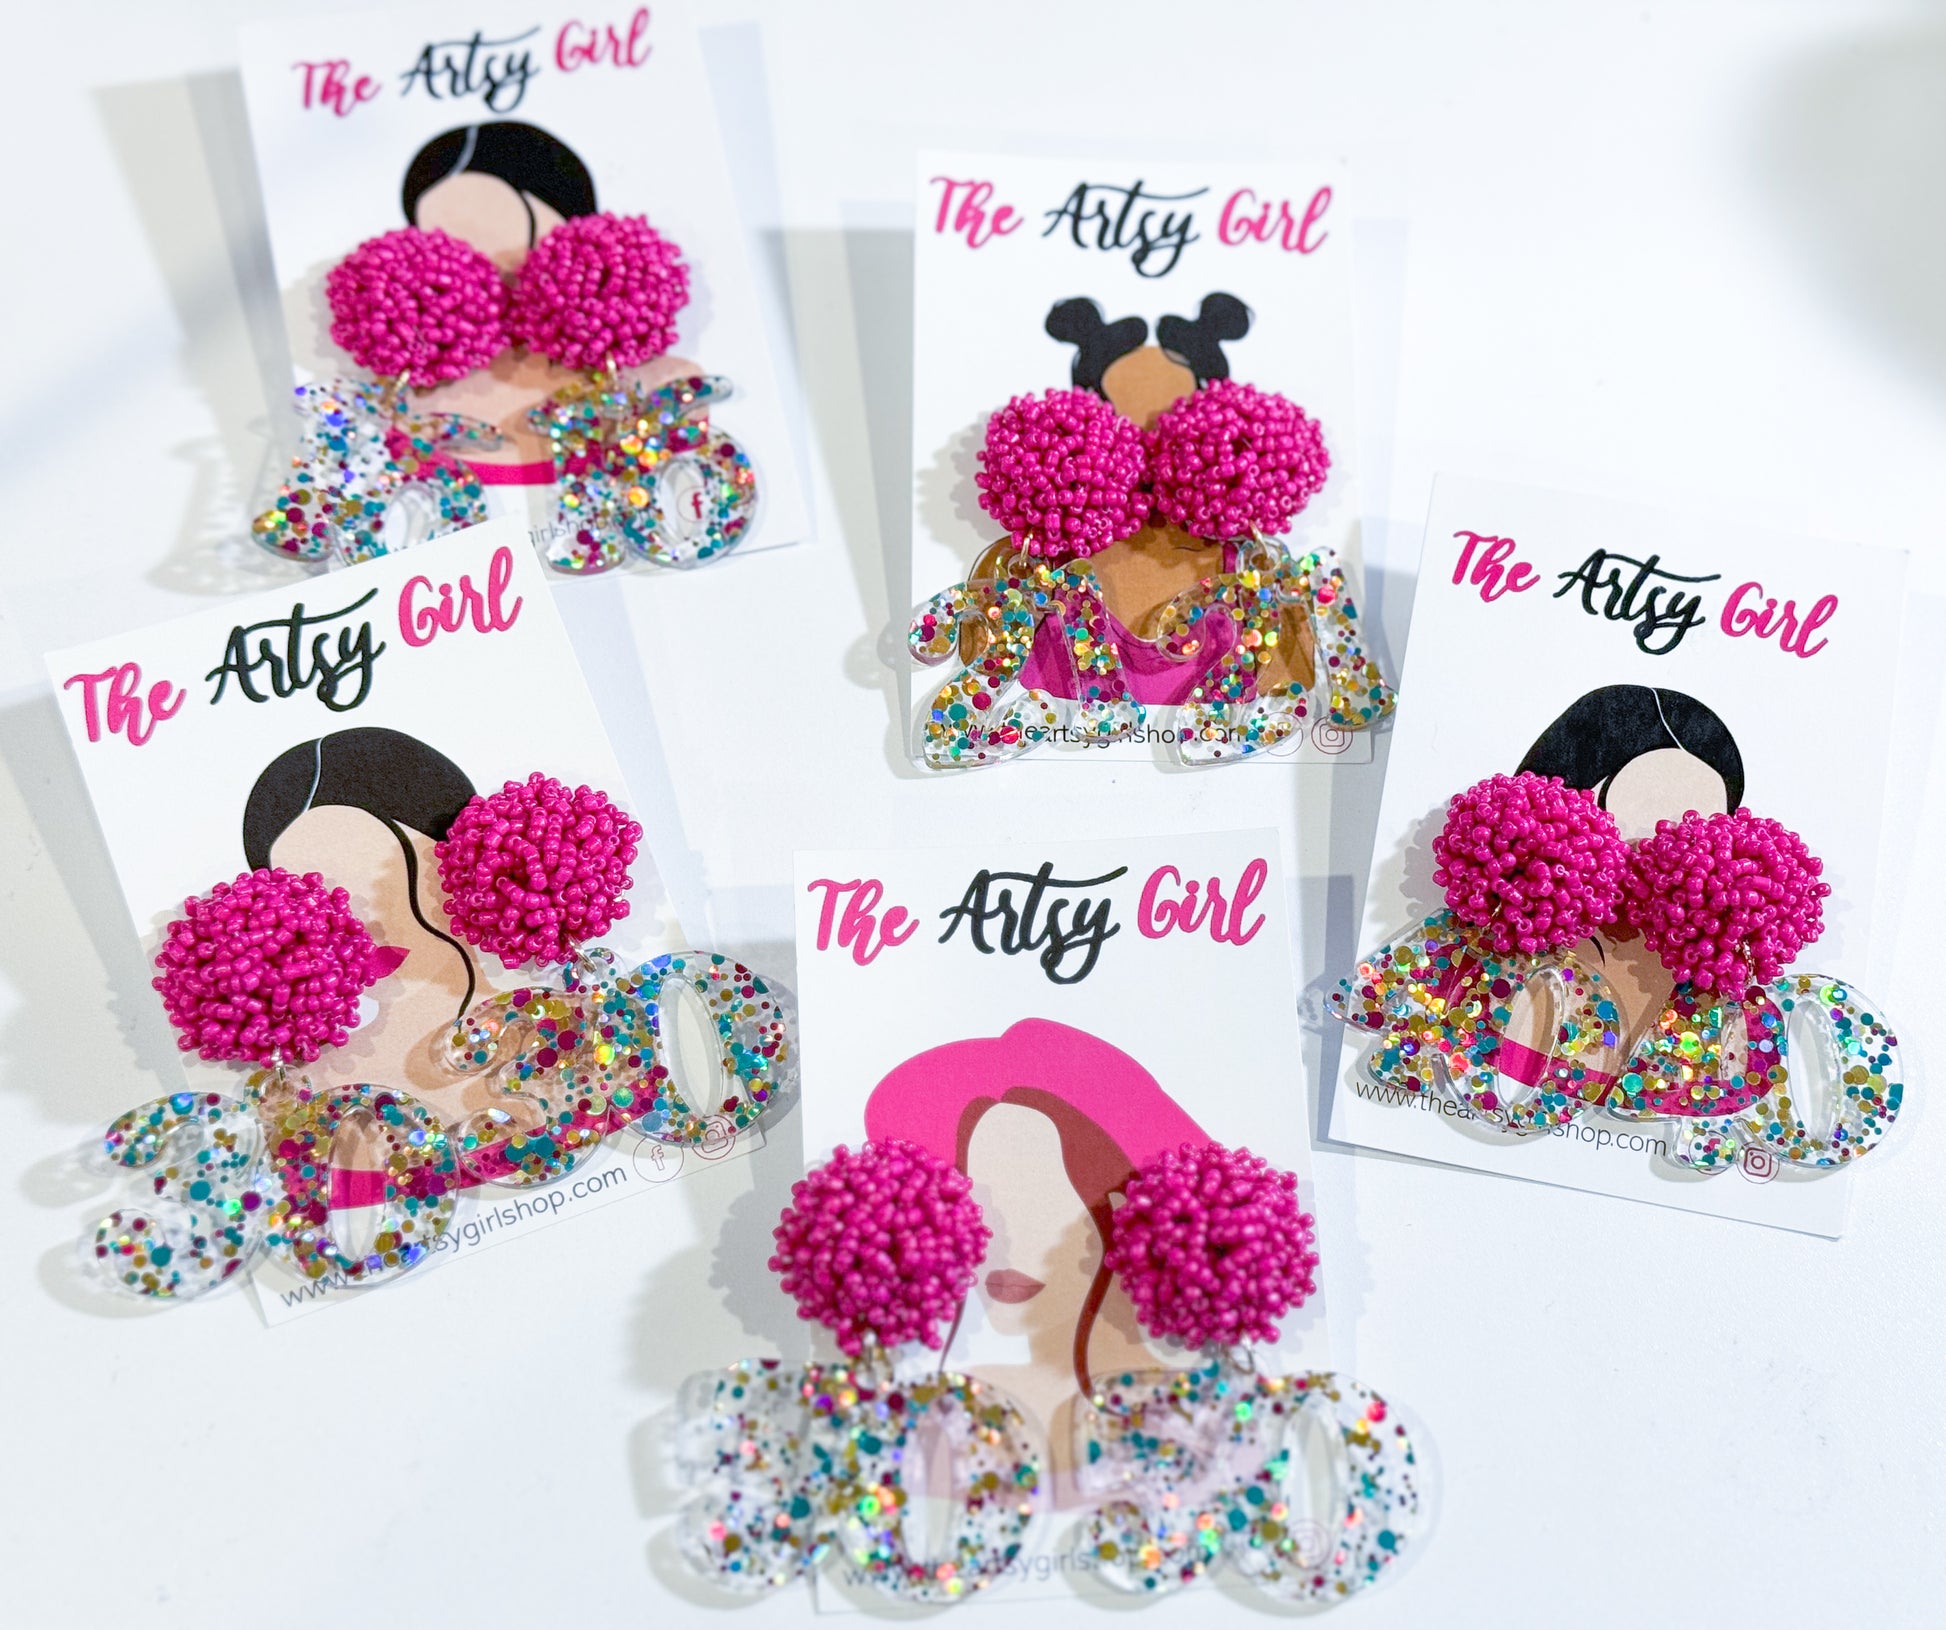 B-Day Fabulous birthday girl earrings, ideal for milestone celebrations, featuring fun and eye-catching designs to make the birthday girl stand out.